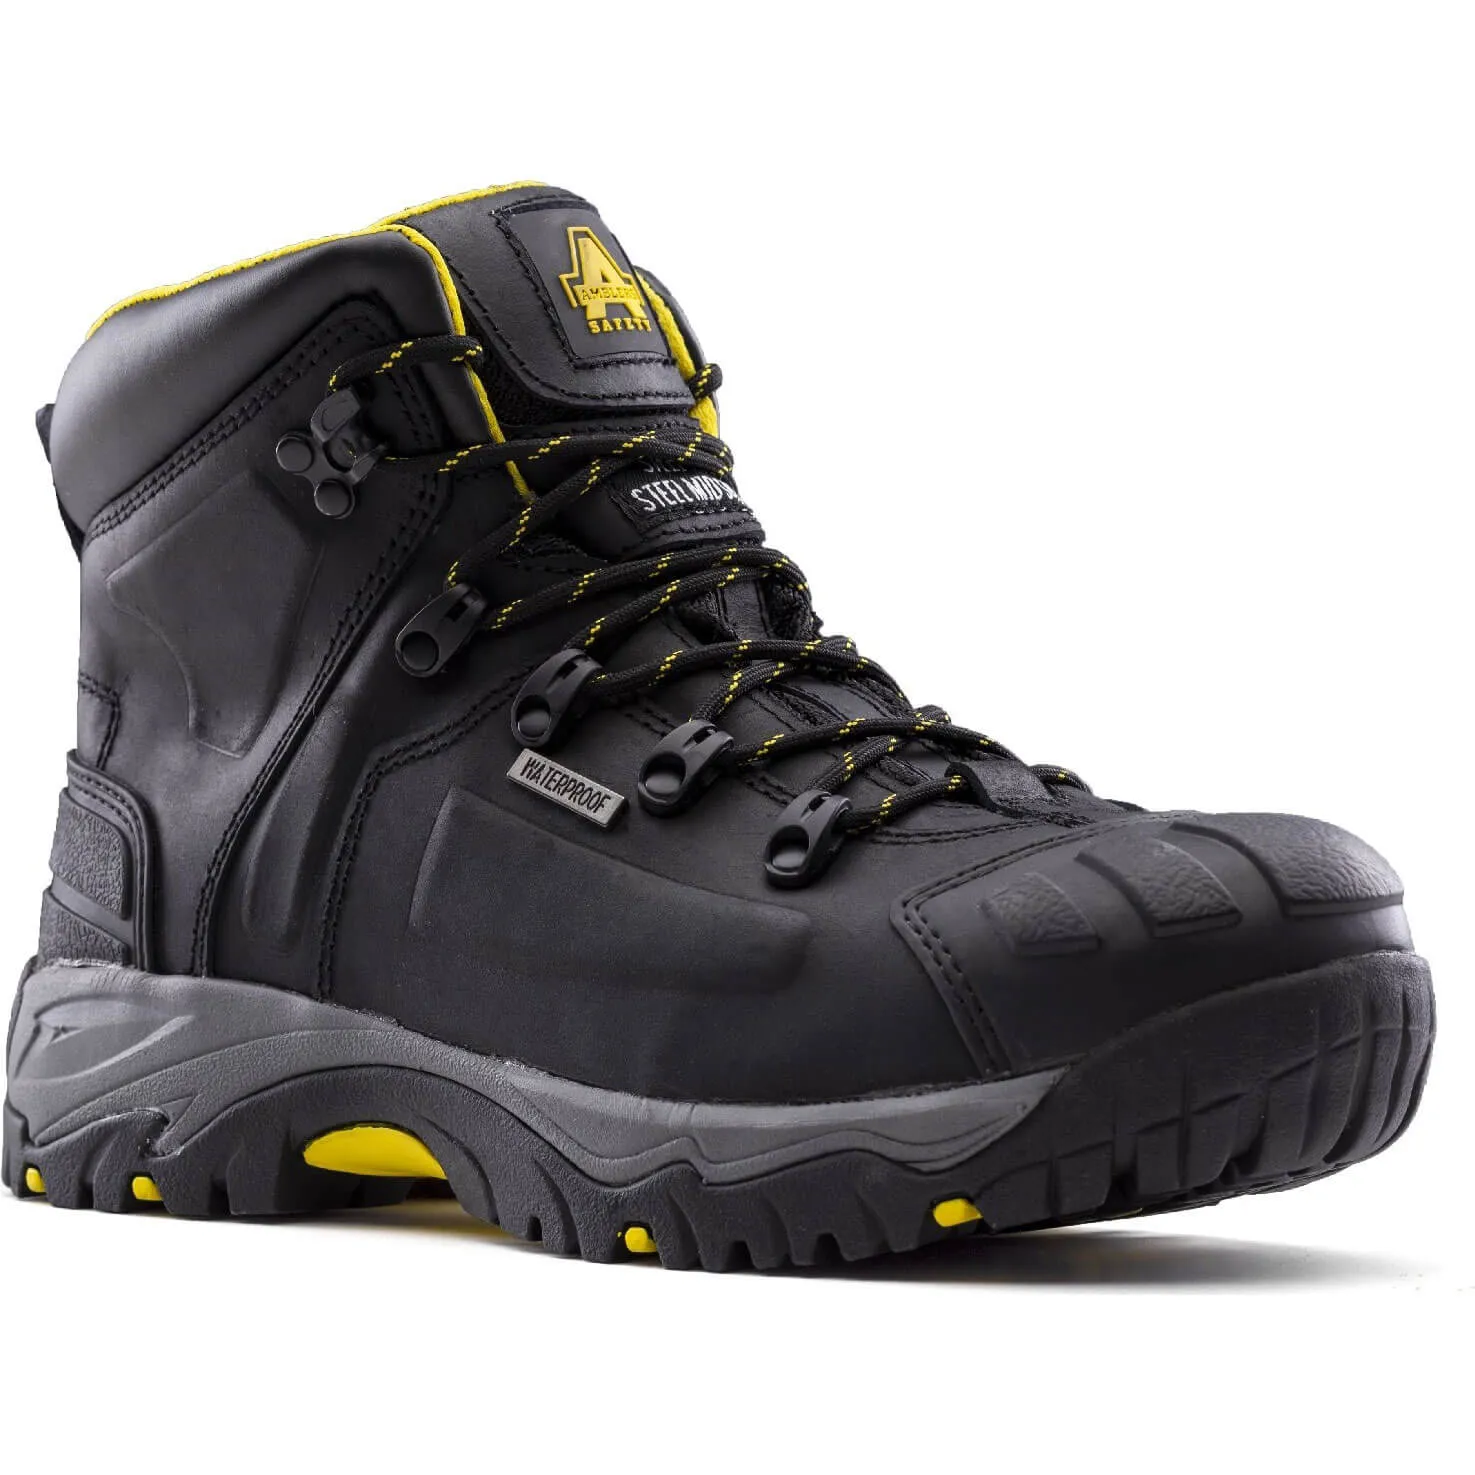 Amblers Safety As803 Waterproof Wide Fit Safety Boot - Black, Size 9